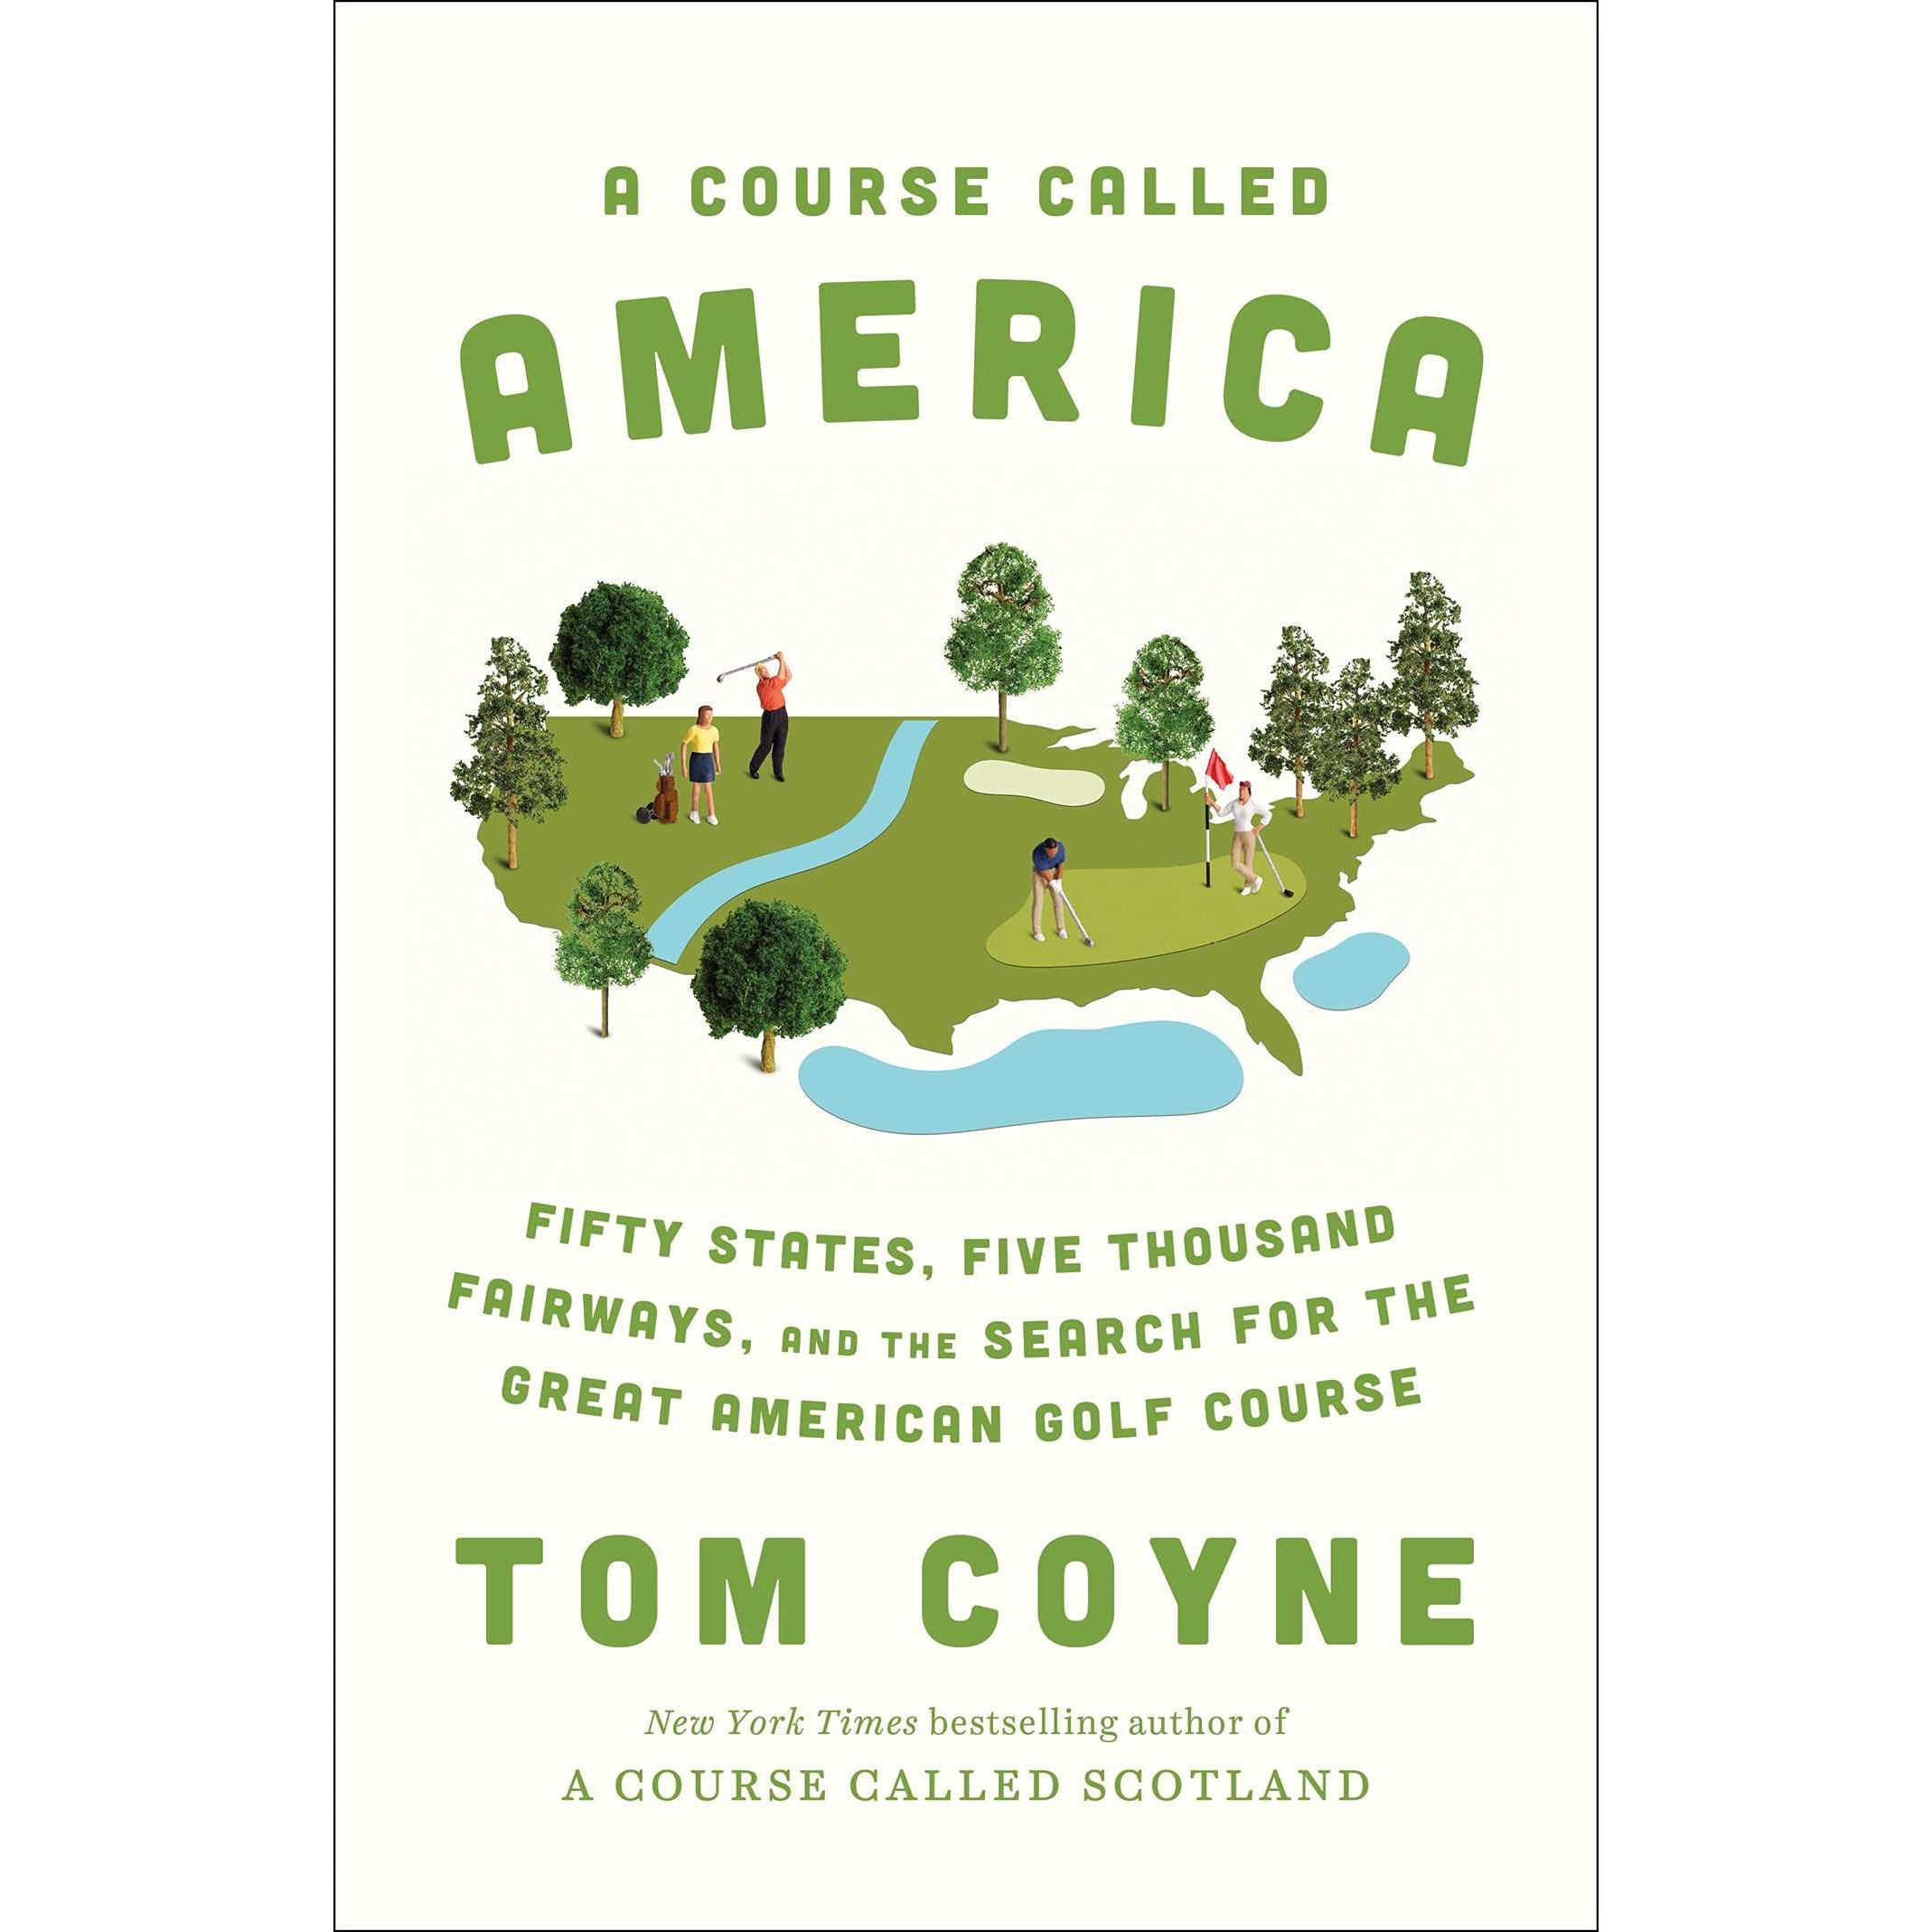 "A Course Called America"